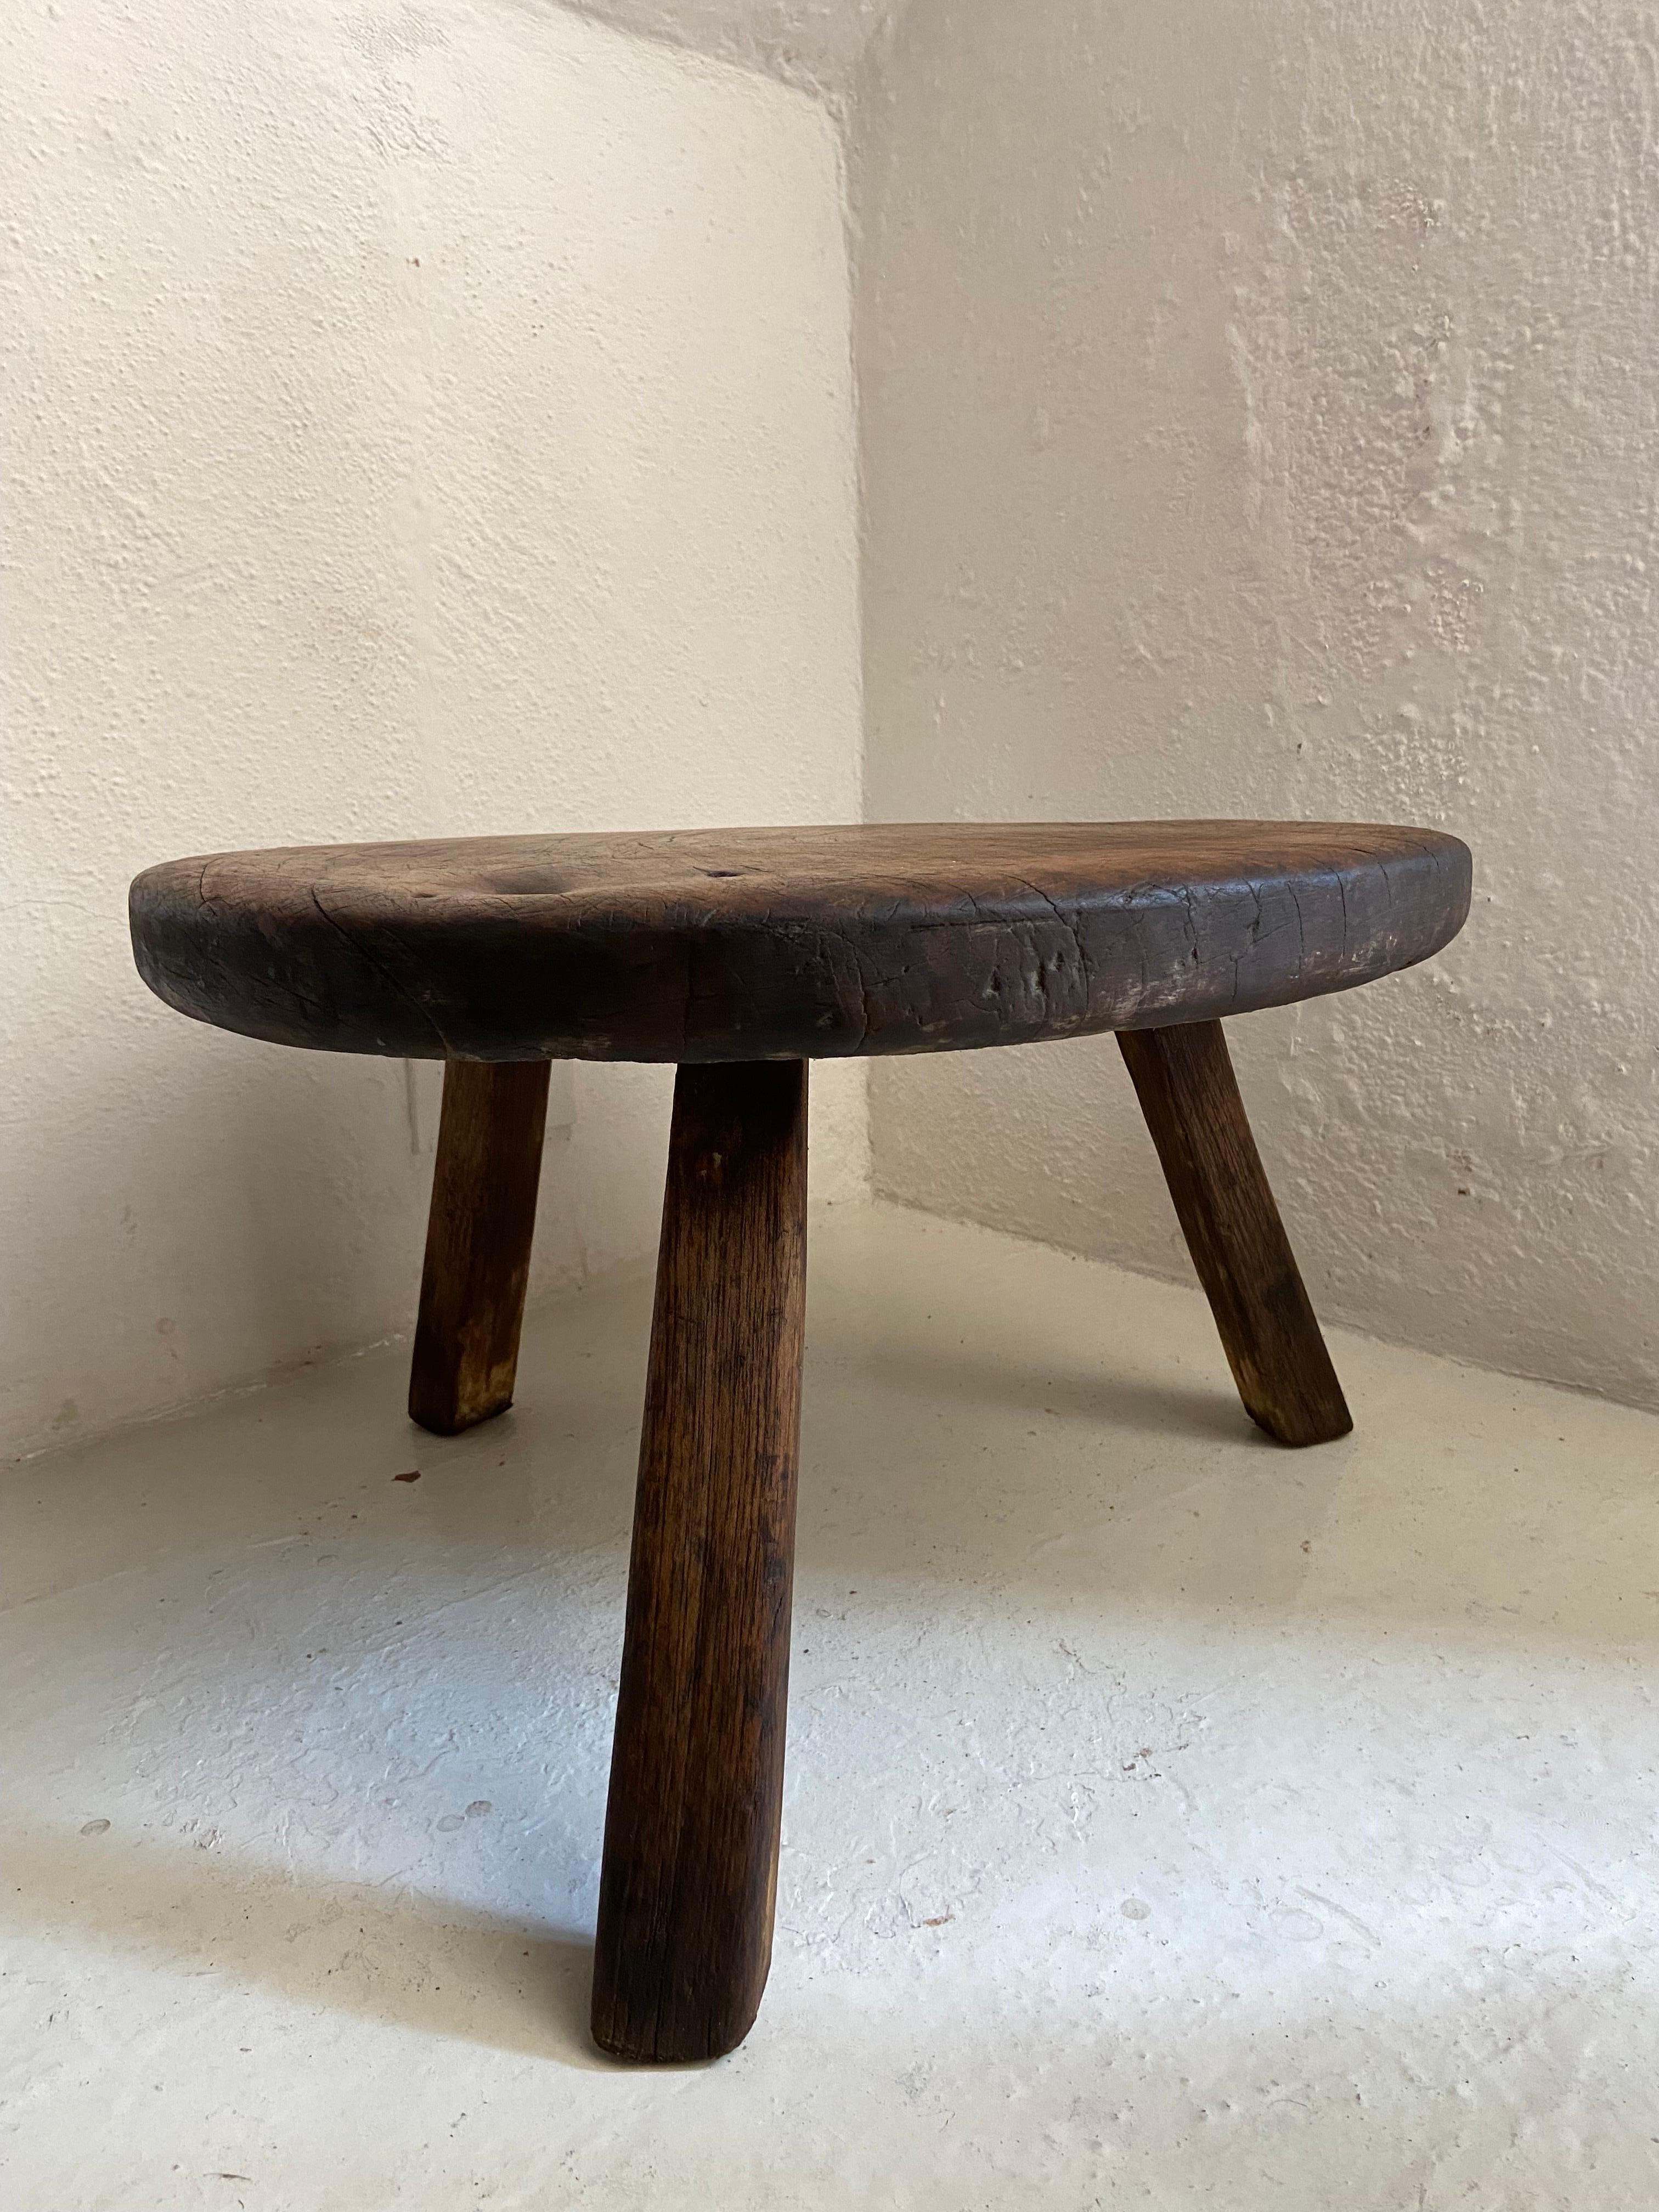 Hardwood round table from Central Yucatan, Mexico, Circa 1970's. All original pieces. Primitive in style, these tables were used for making tortillas.